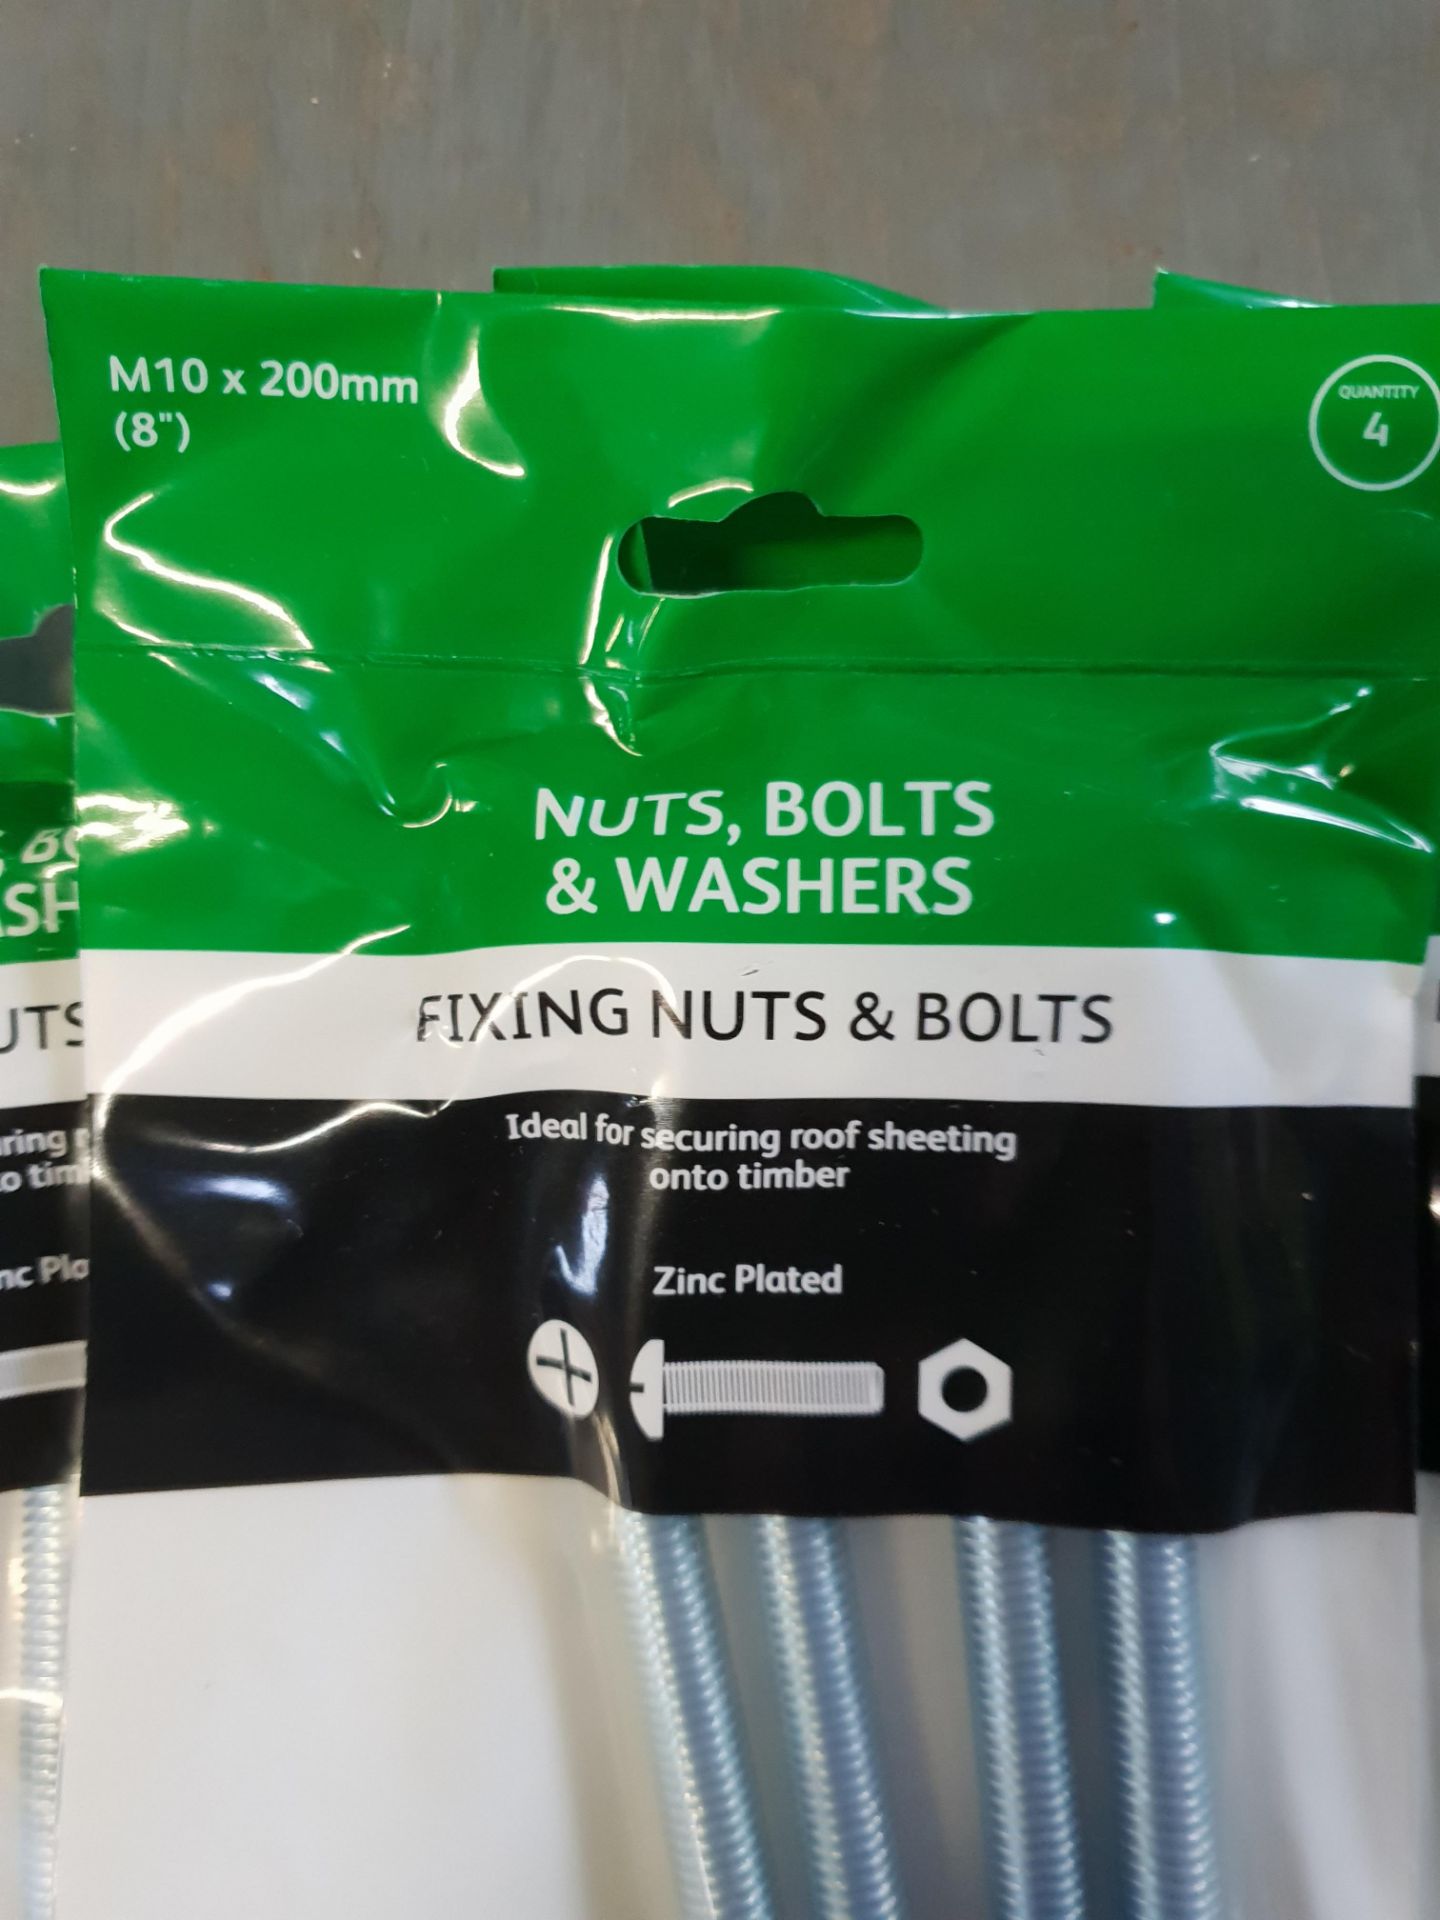 20 packs M10 x 200mm Fixing bolts and nuts - Image 2 of 3